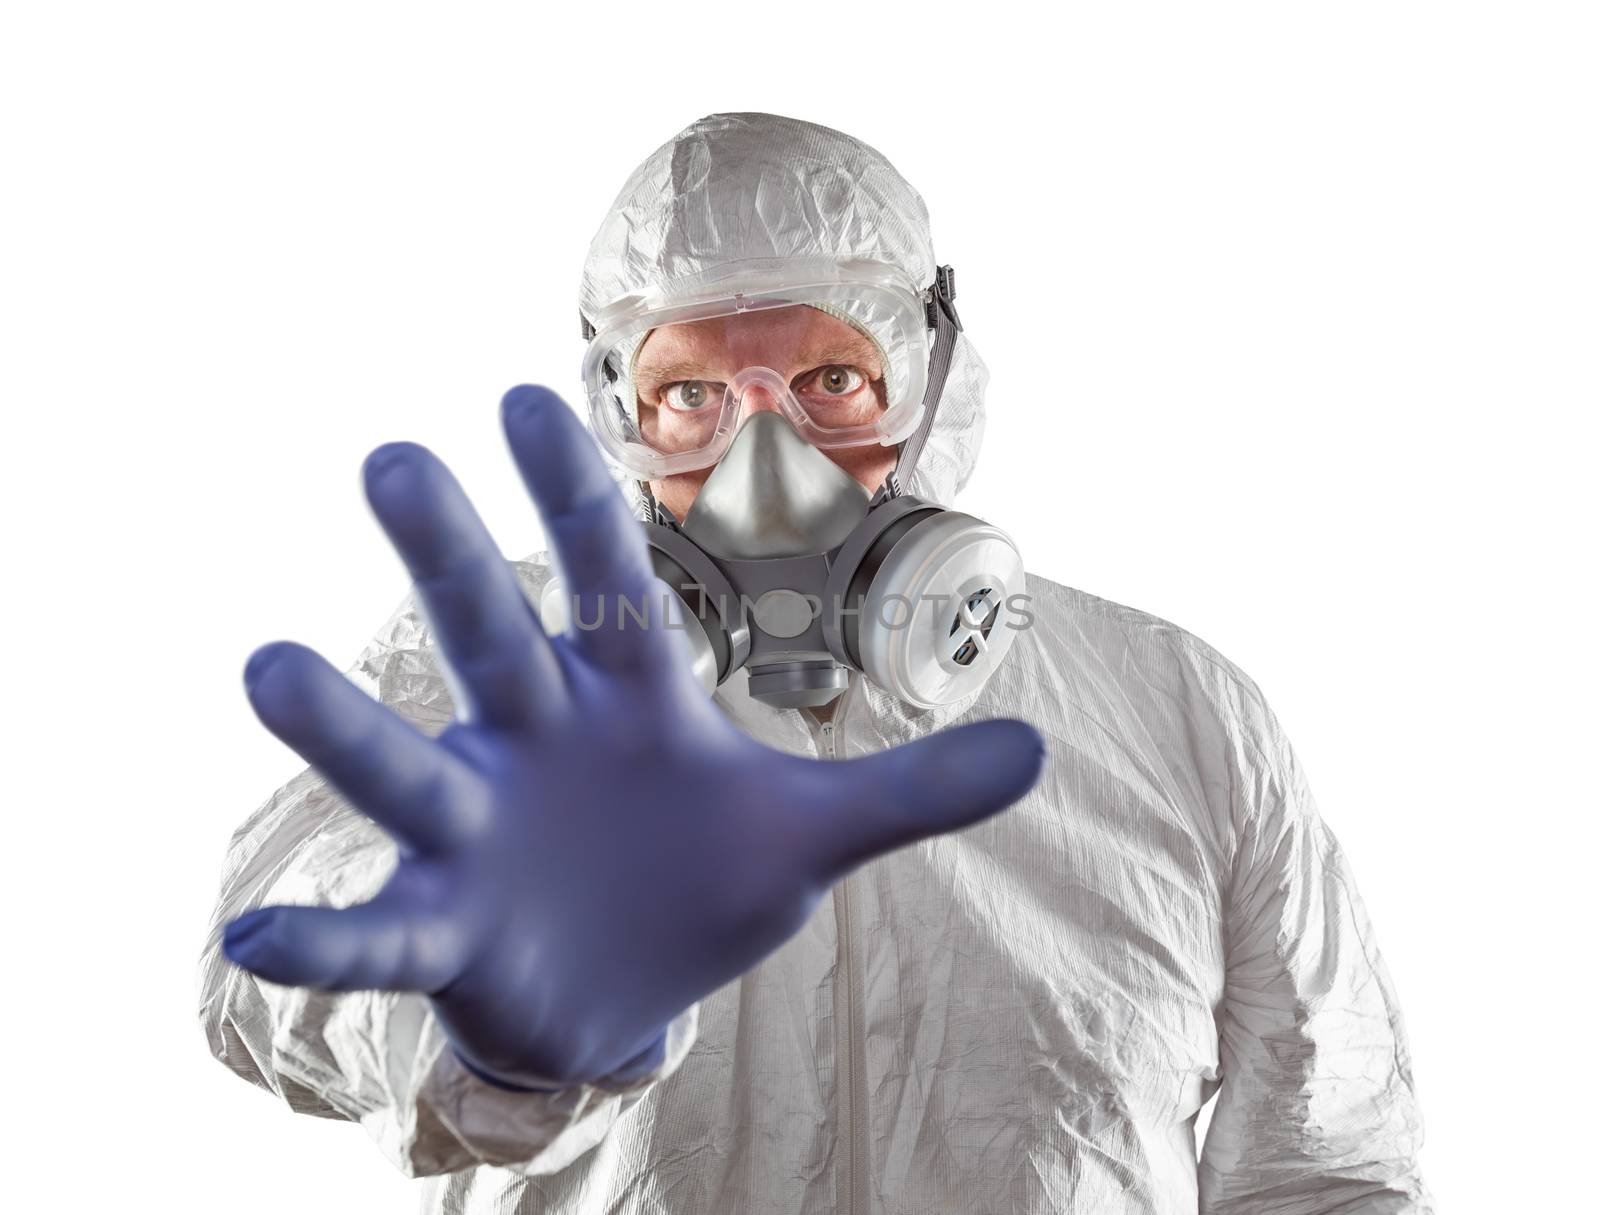 Man Wearing Hazmat Suit Reaching Out With Hand Isolated On White by Feverpitched